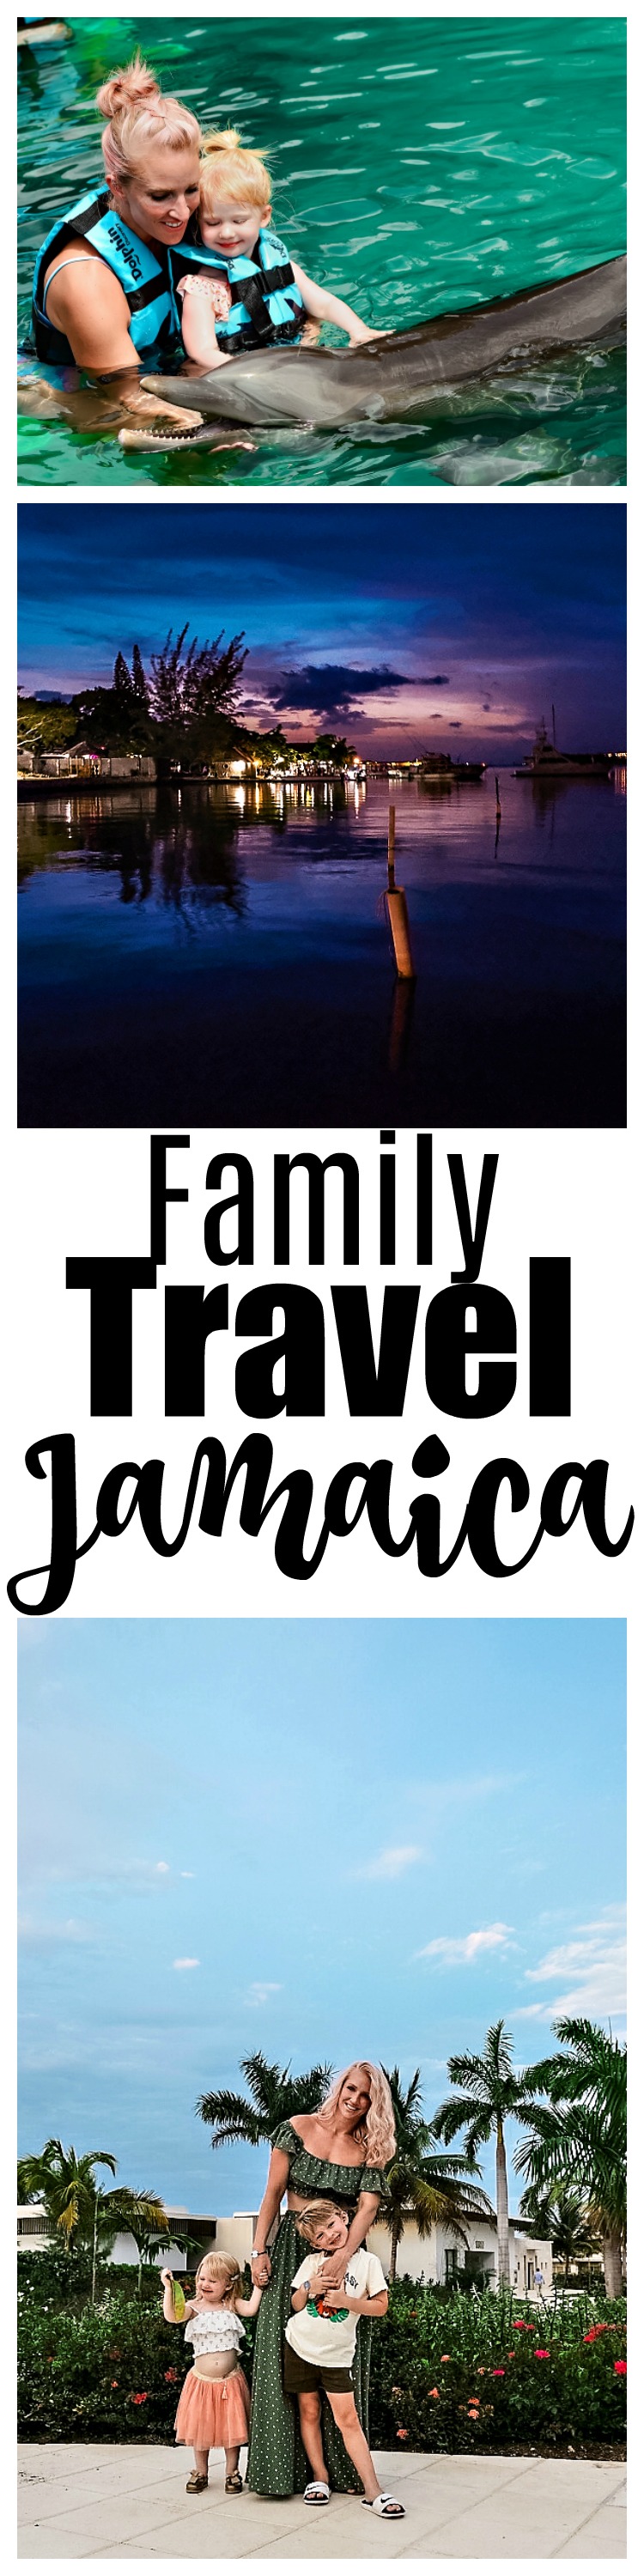 The Royalton White Sands | Vacation | Dining | Activities | Swimming with Dolphins | Family Trip to Jamaica - Travel Guide featured by popular Atlanta travel blogger Happily Hughes 